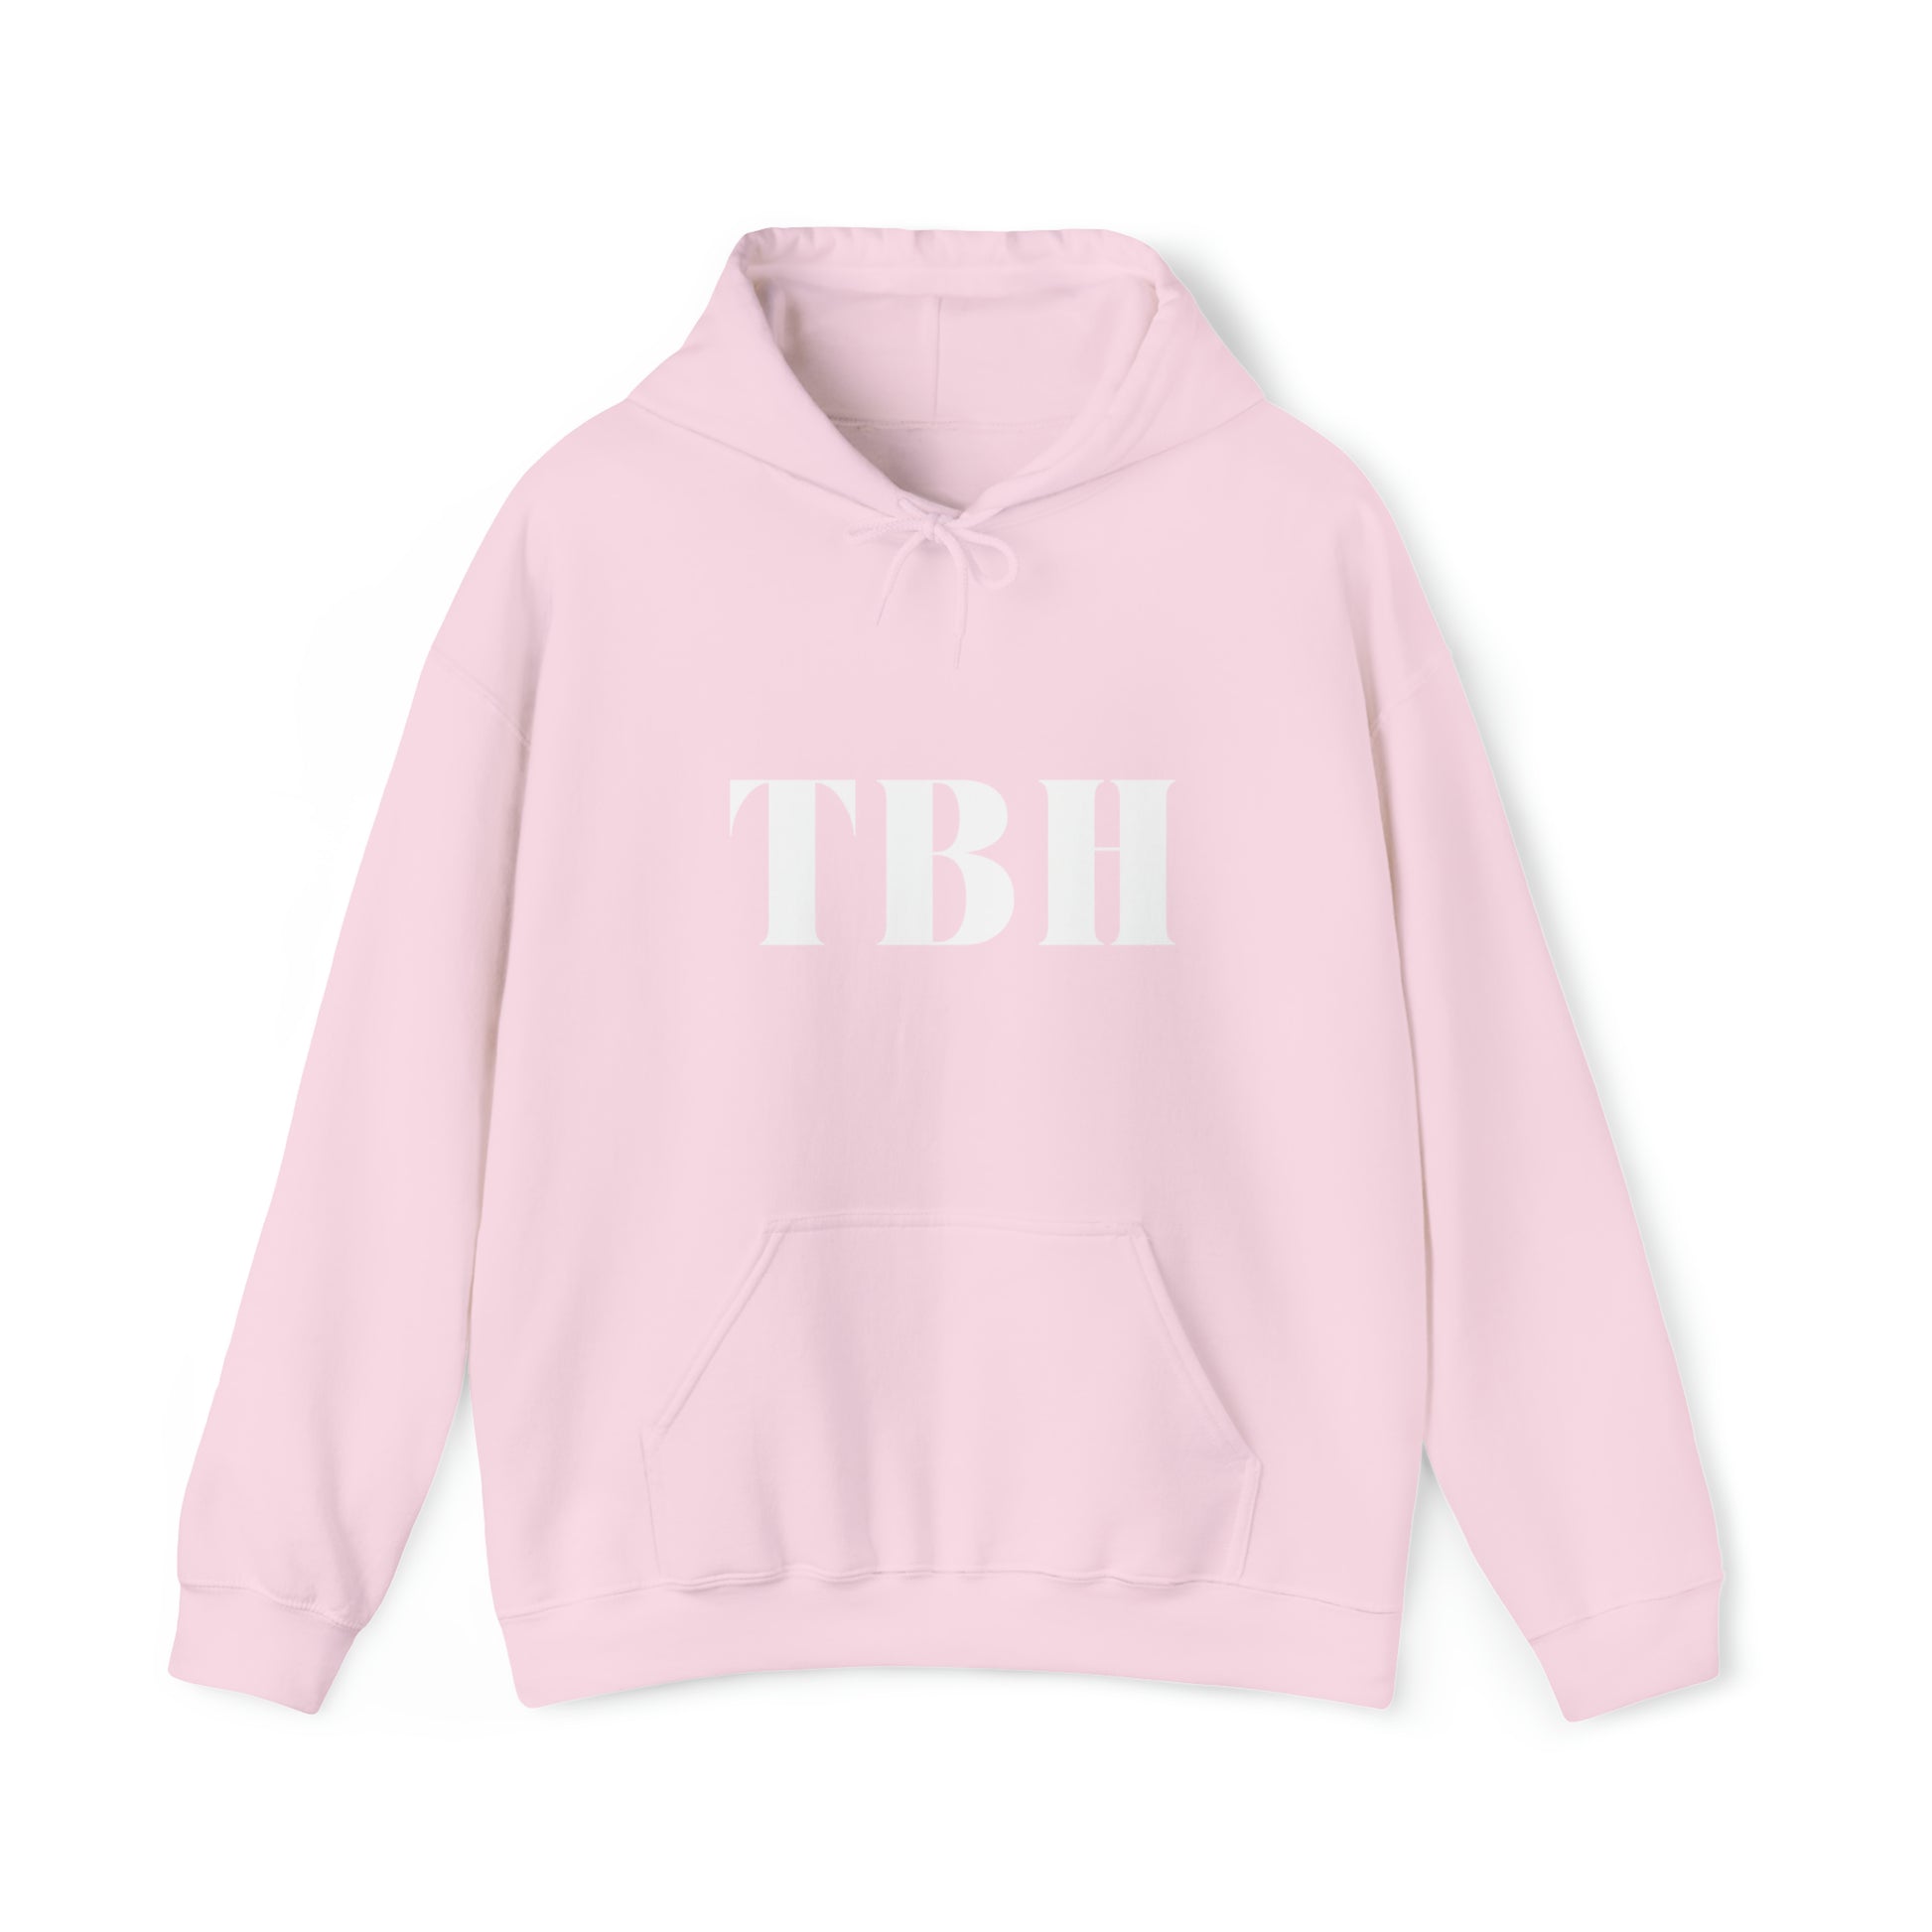 S Light Pink TBH Hoodie from HoodySZN.com